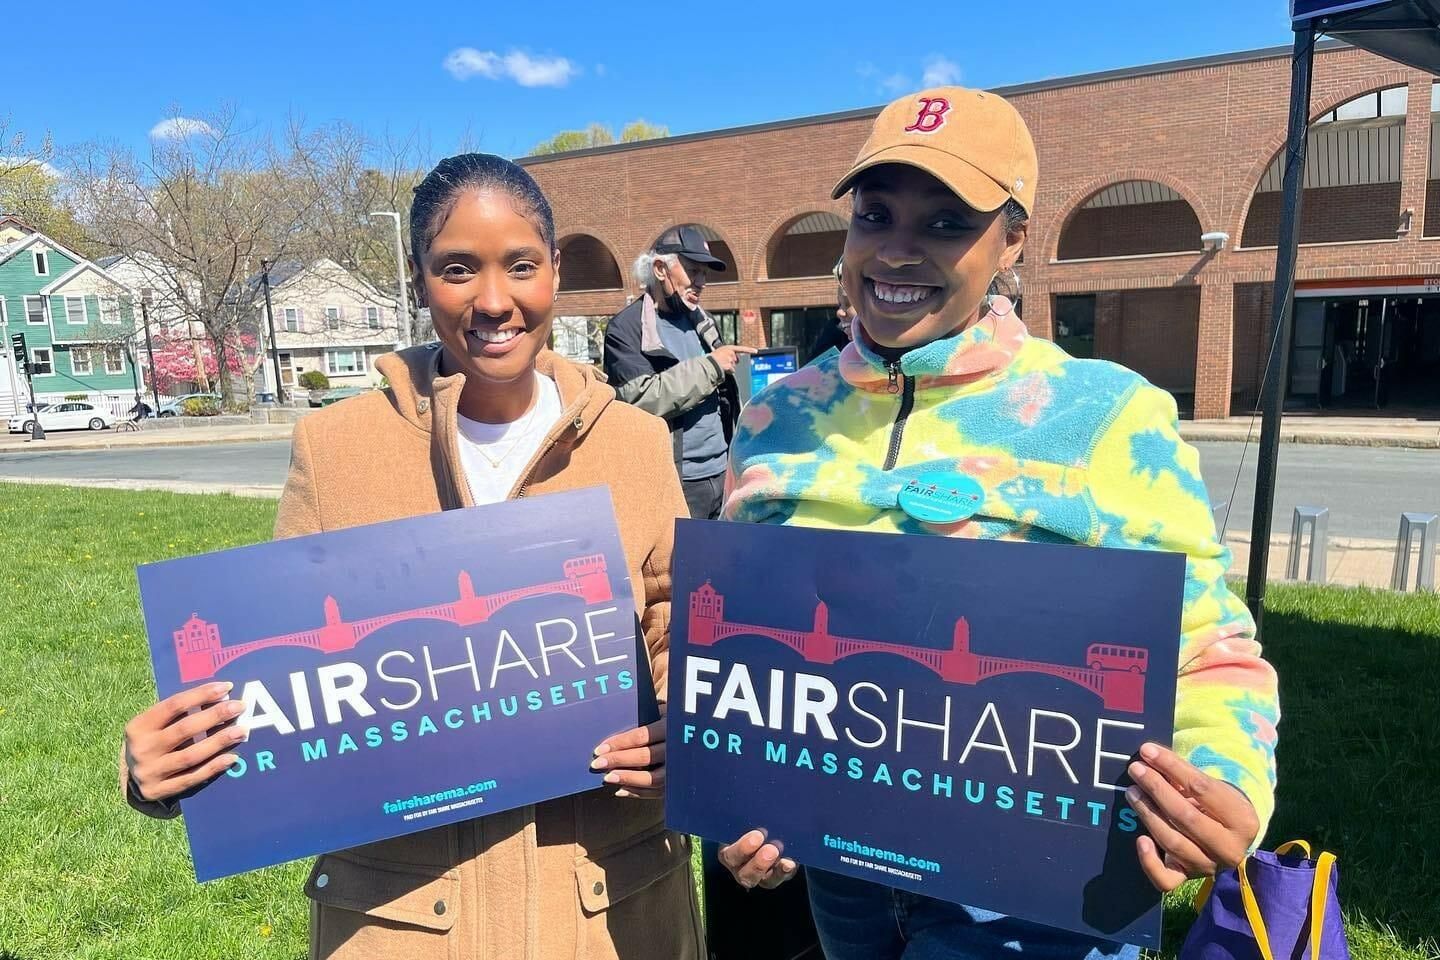 Two women holding signs that say "Fair Share for Massachusetts"